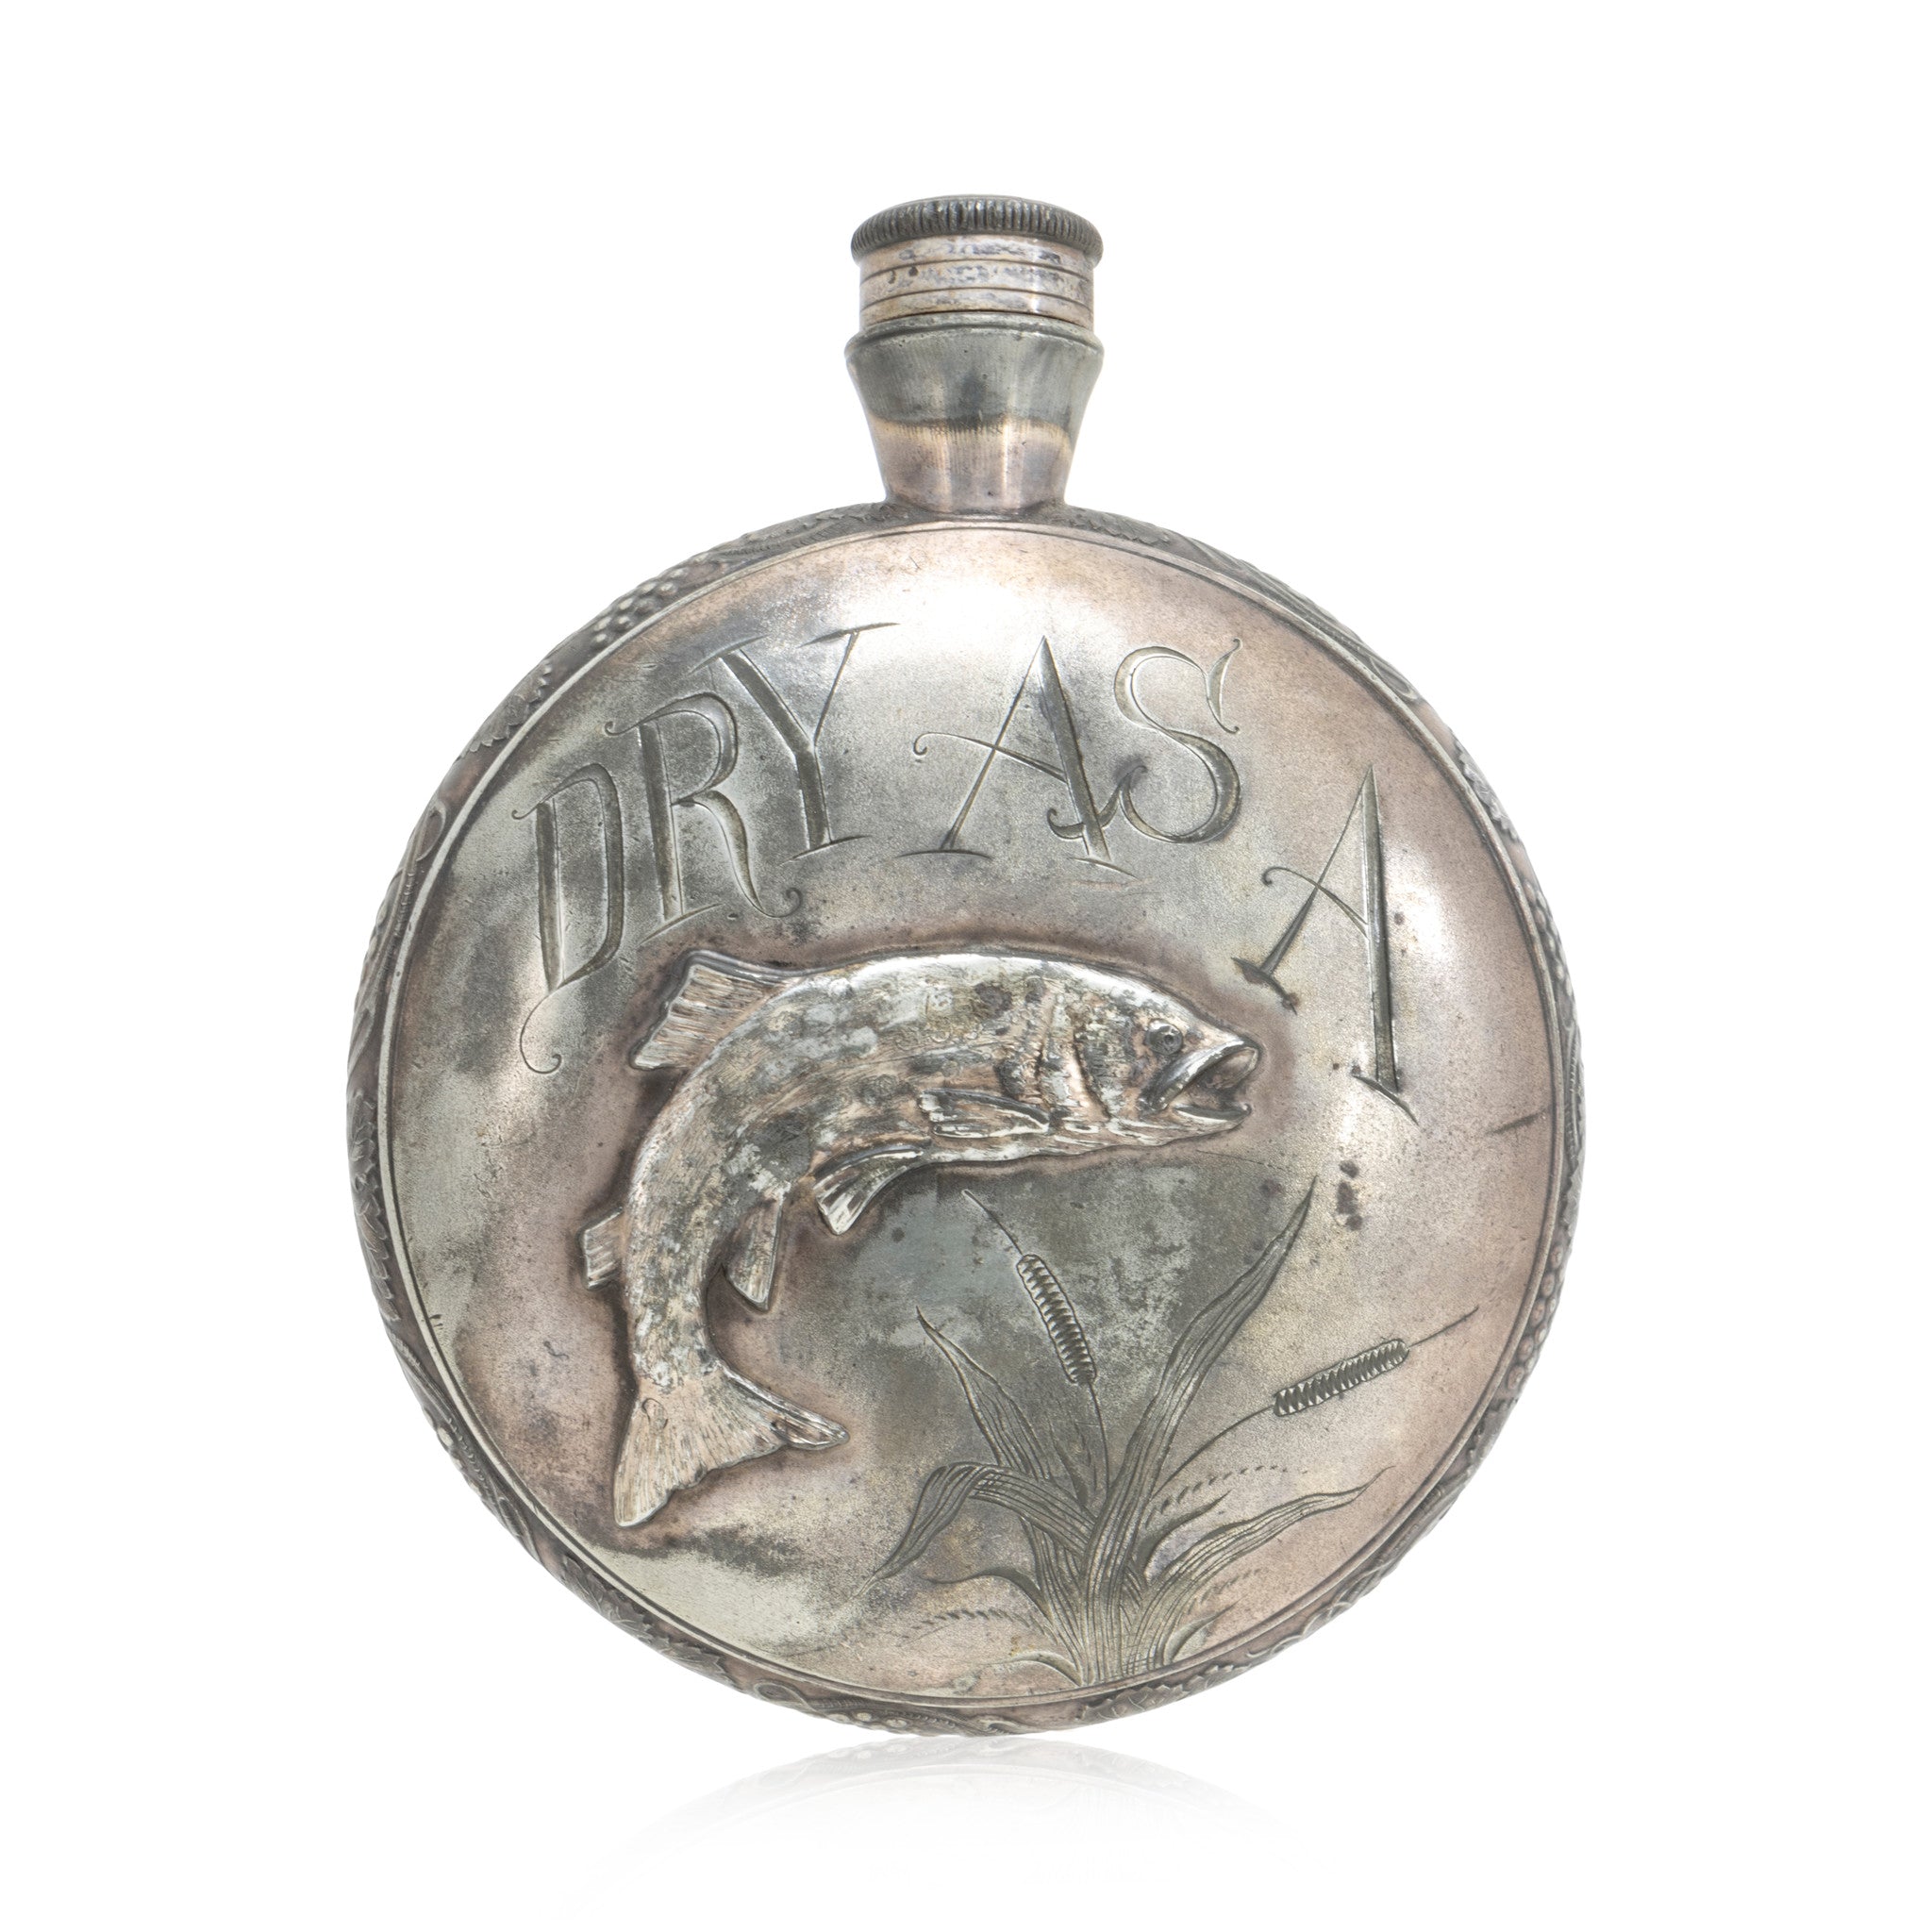 Dry as a Fish Silver Flask